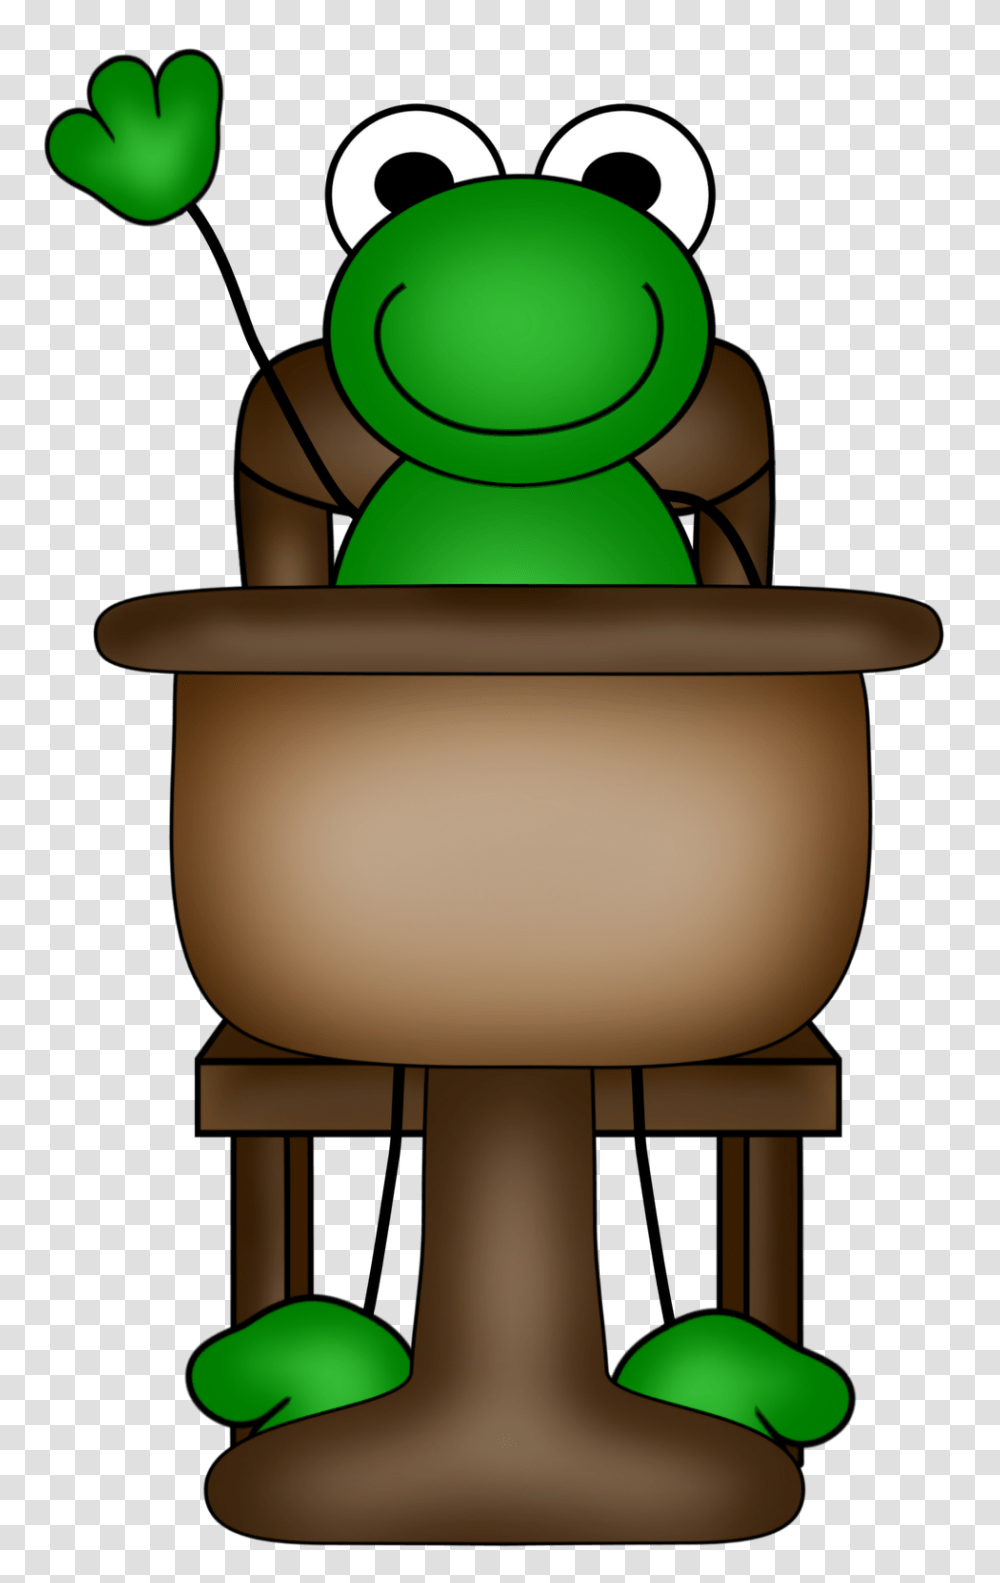 Frog Clip Art Fomy Frogs Clip Art And Cards, Lamp, Chair, Furniture, Architecture Transparent Png